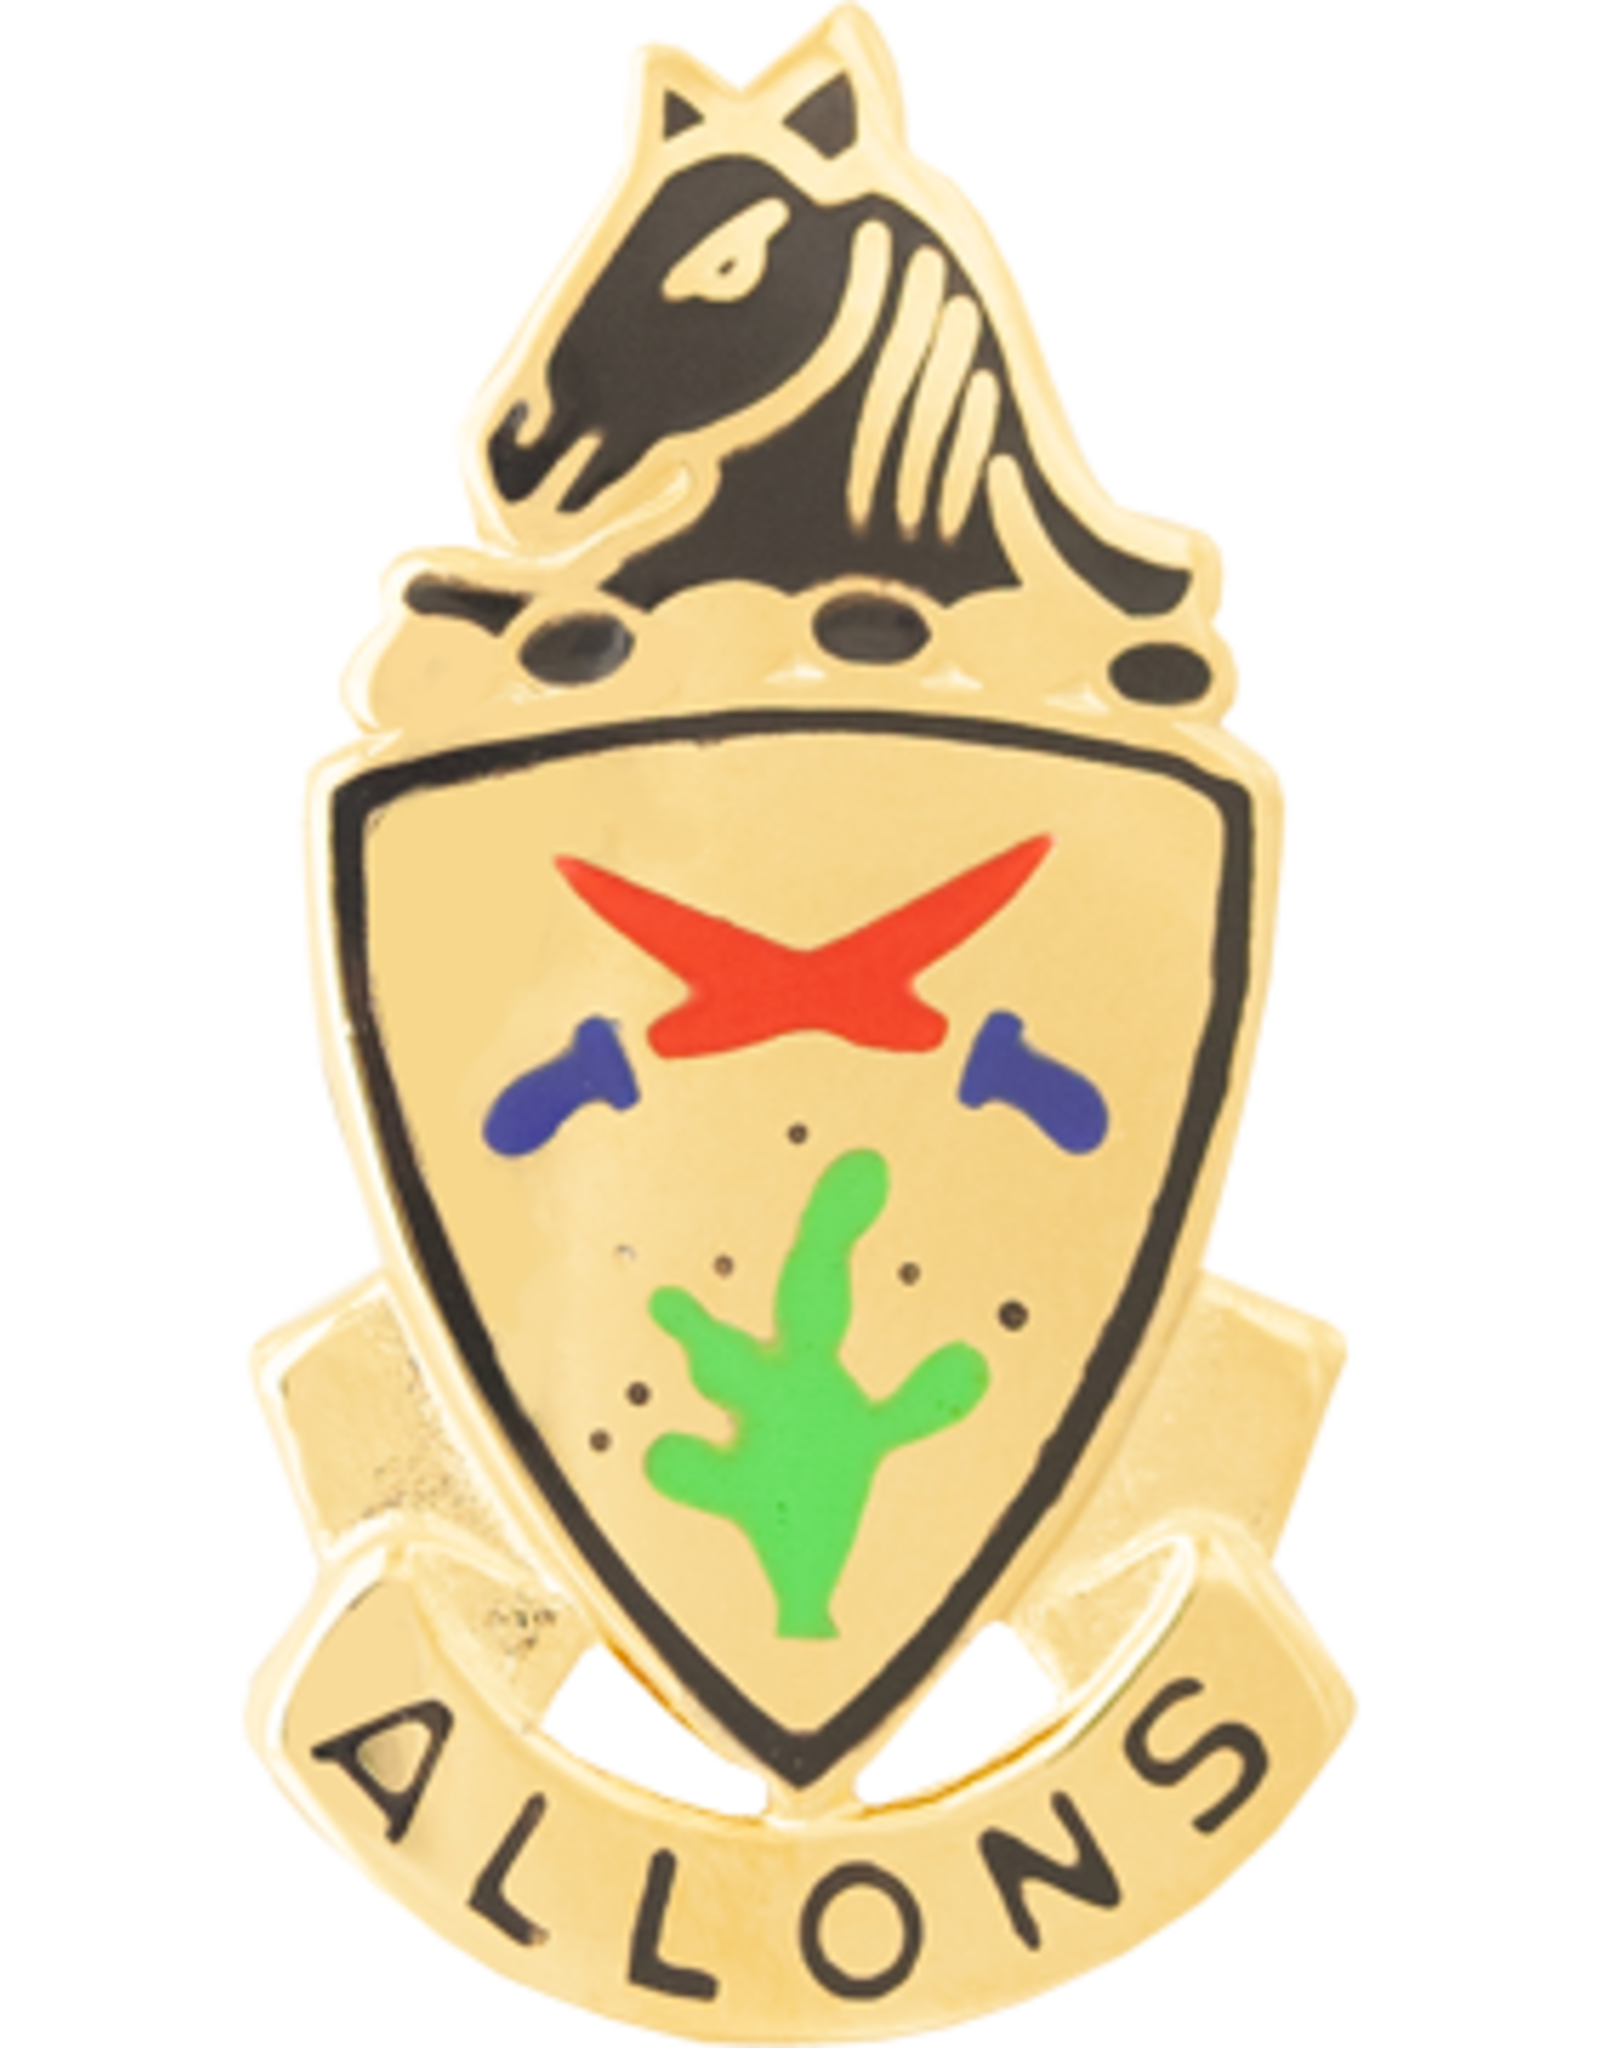 11th Armored Cavalry Crest "Allons"